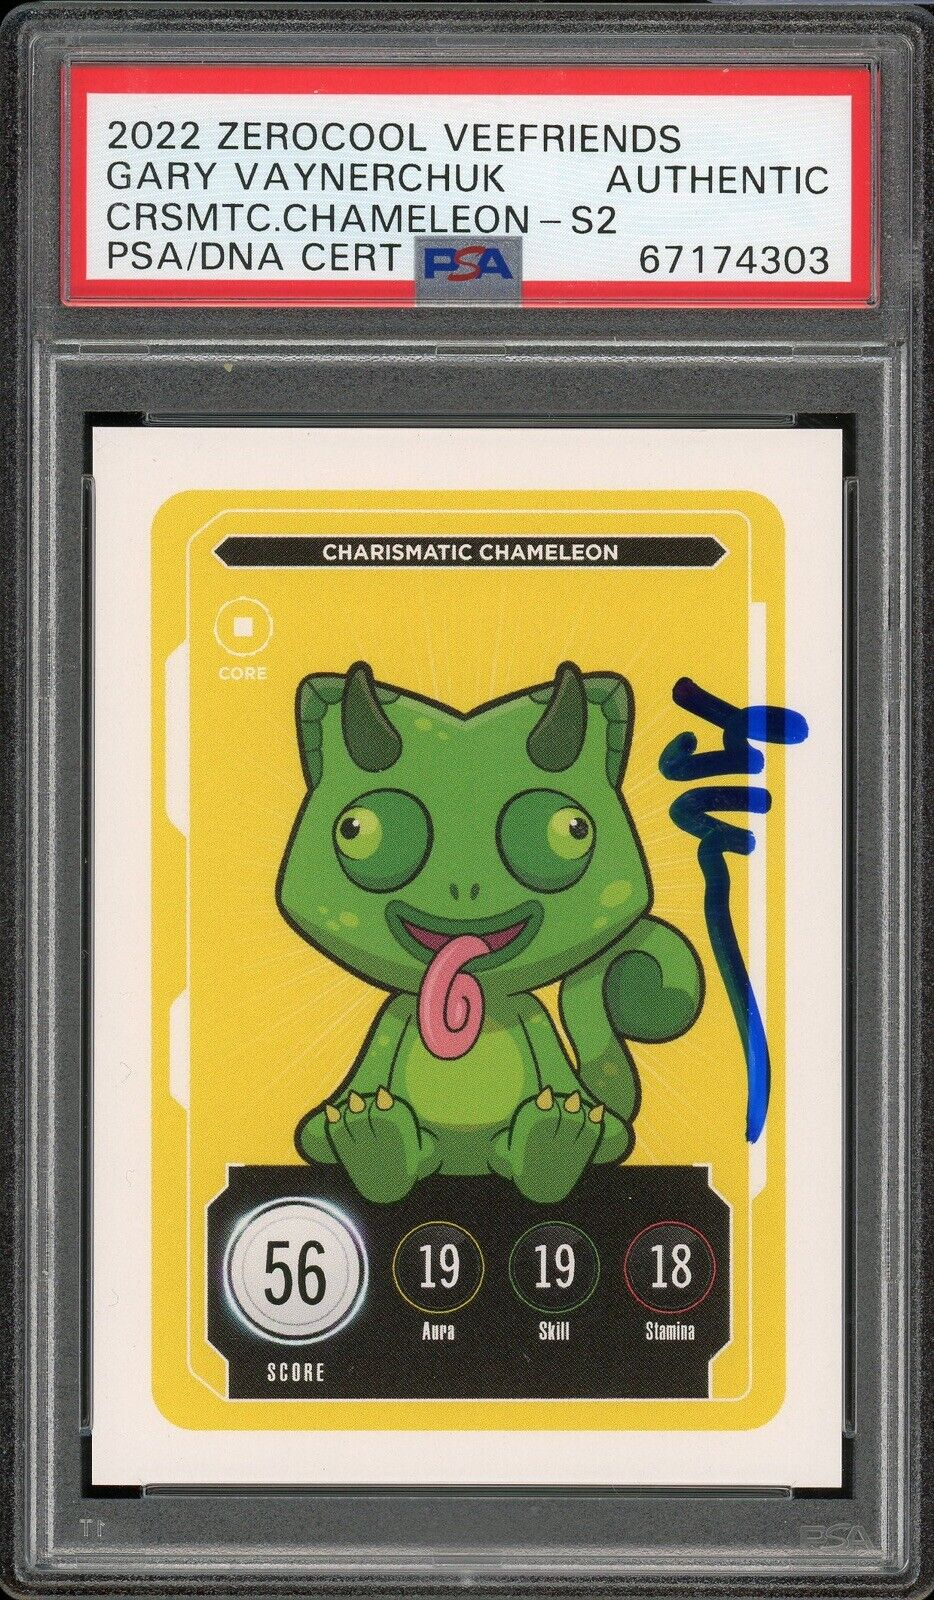 Gary Vee Vee Friends Charismatic Chameleon Signed by GARY VEE PSA/DNA Authentic